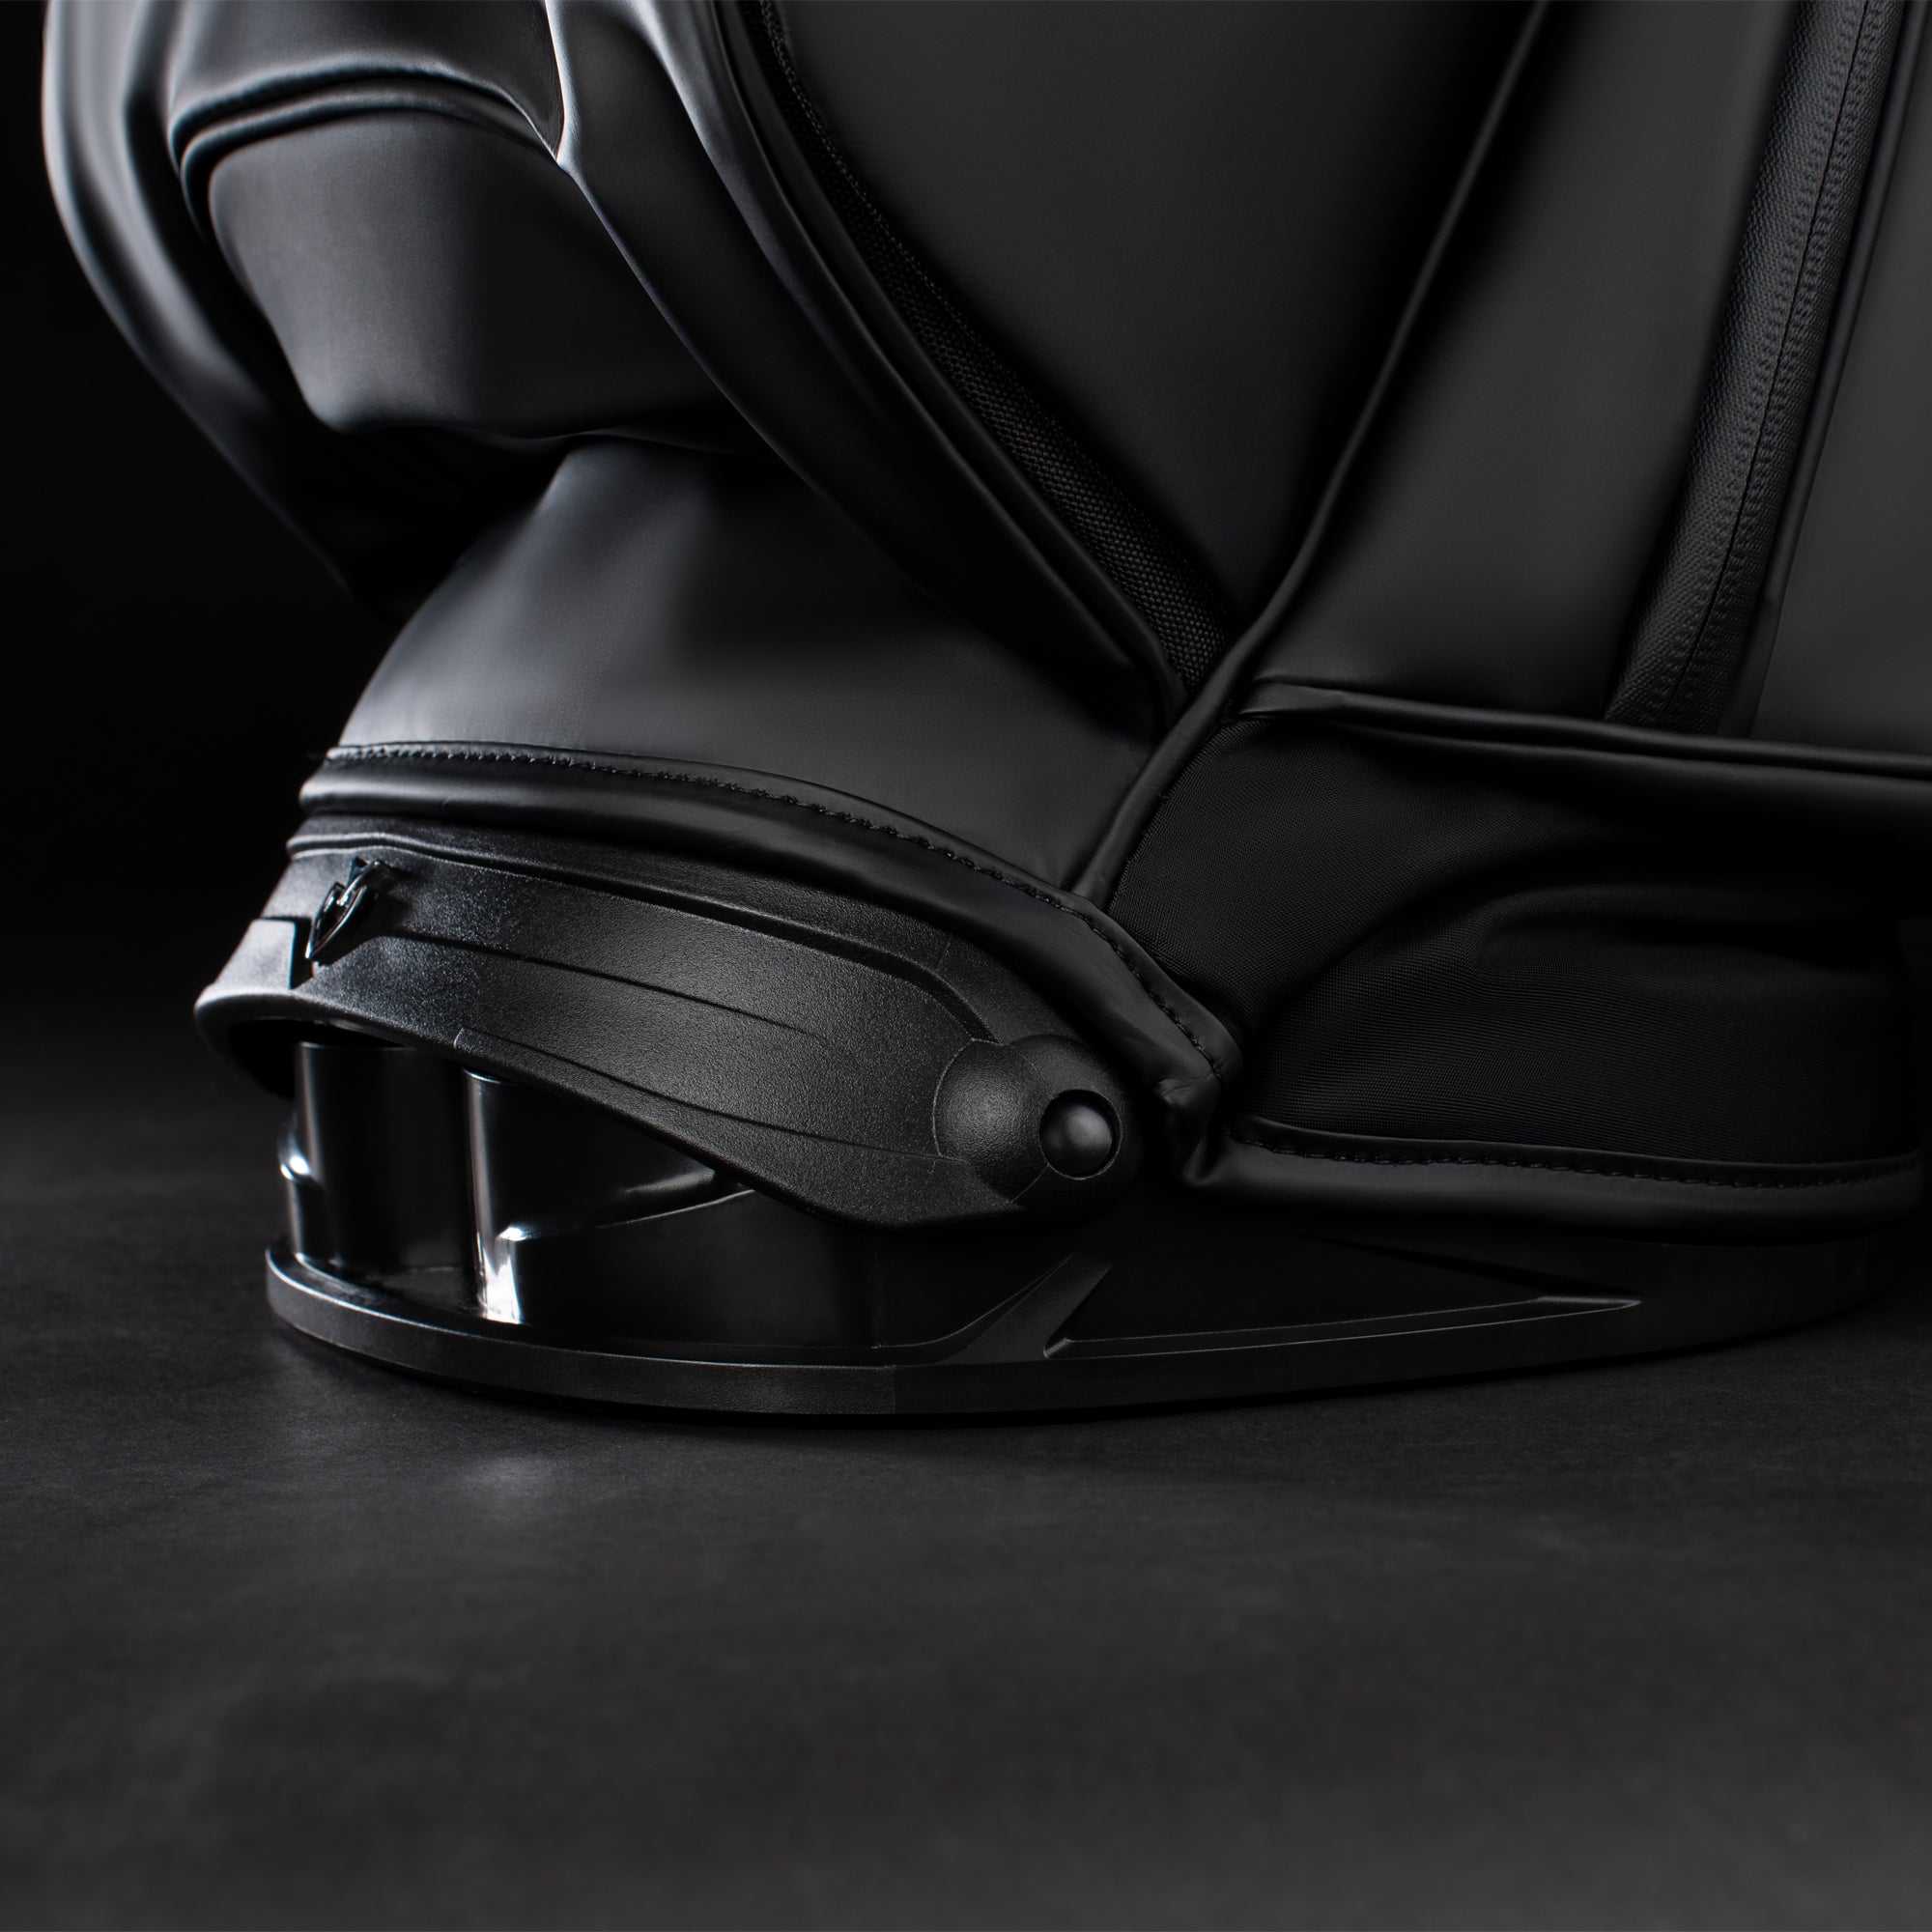 Close up image of the Rotator Base on a black golf bag in a black studio